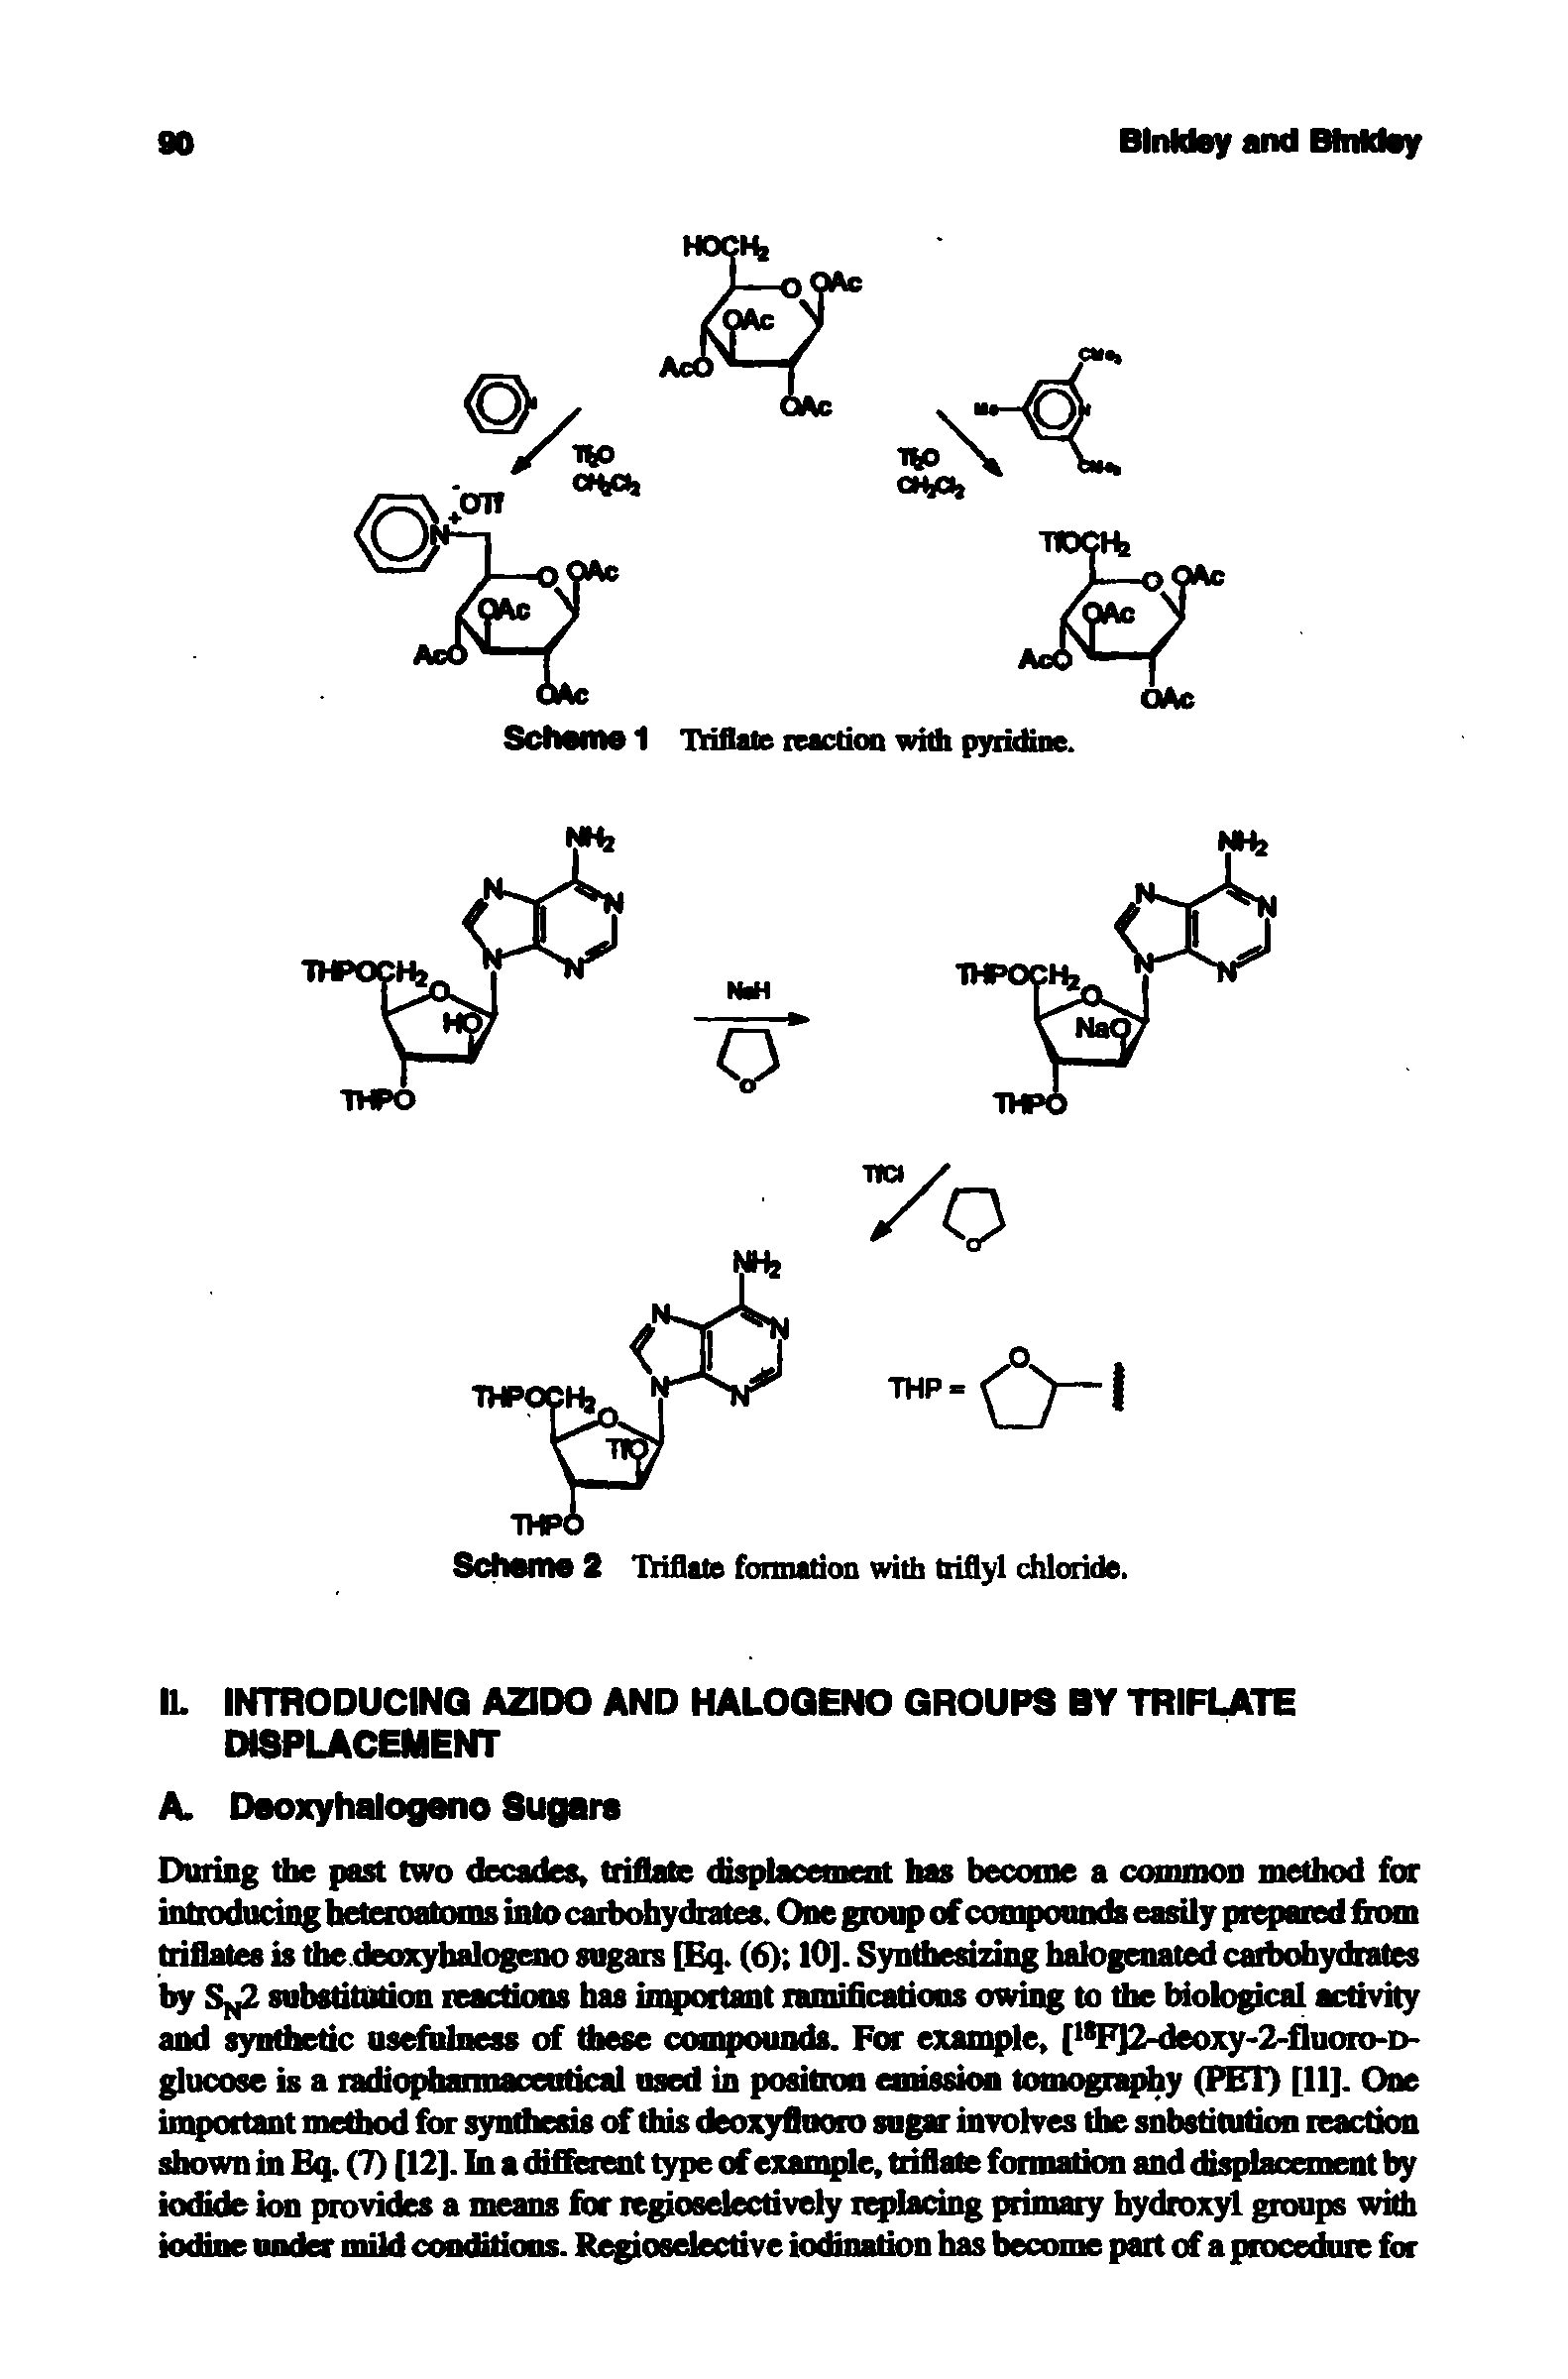 Scheme 2 Triflate formation with triflyl chloride.